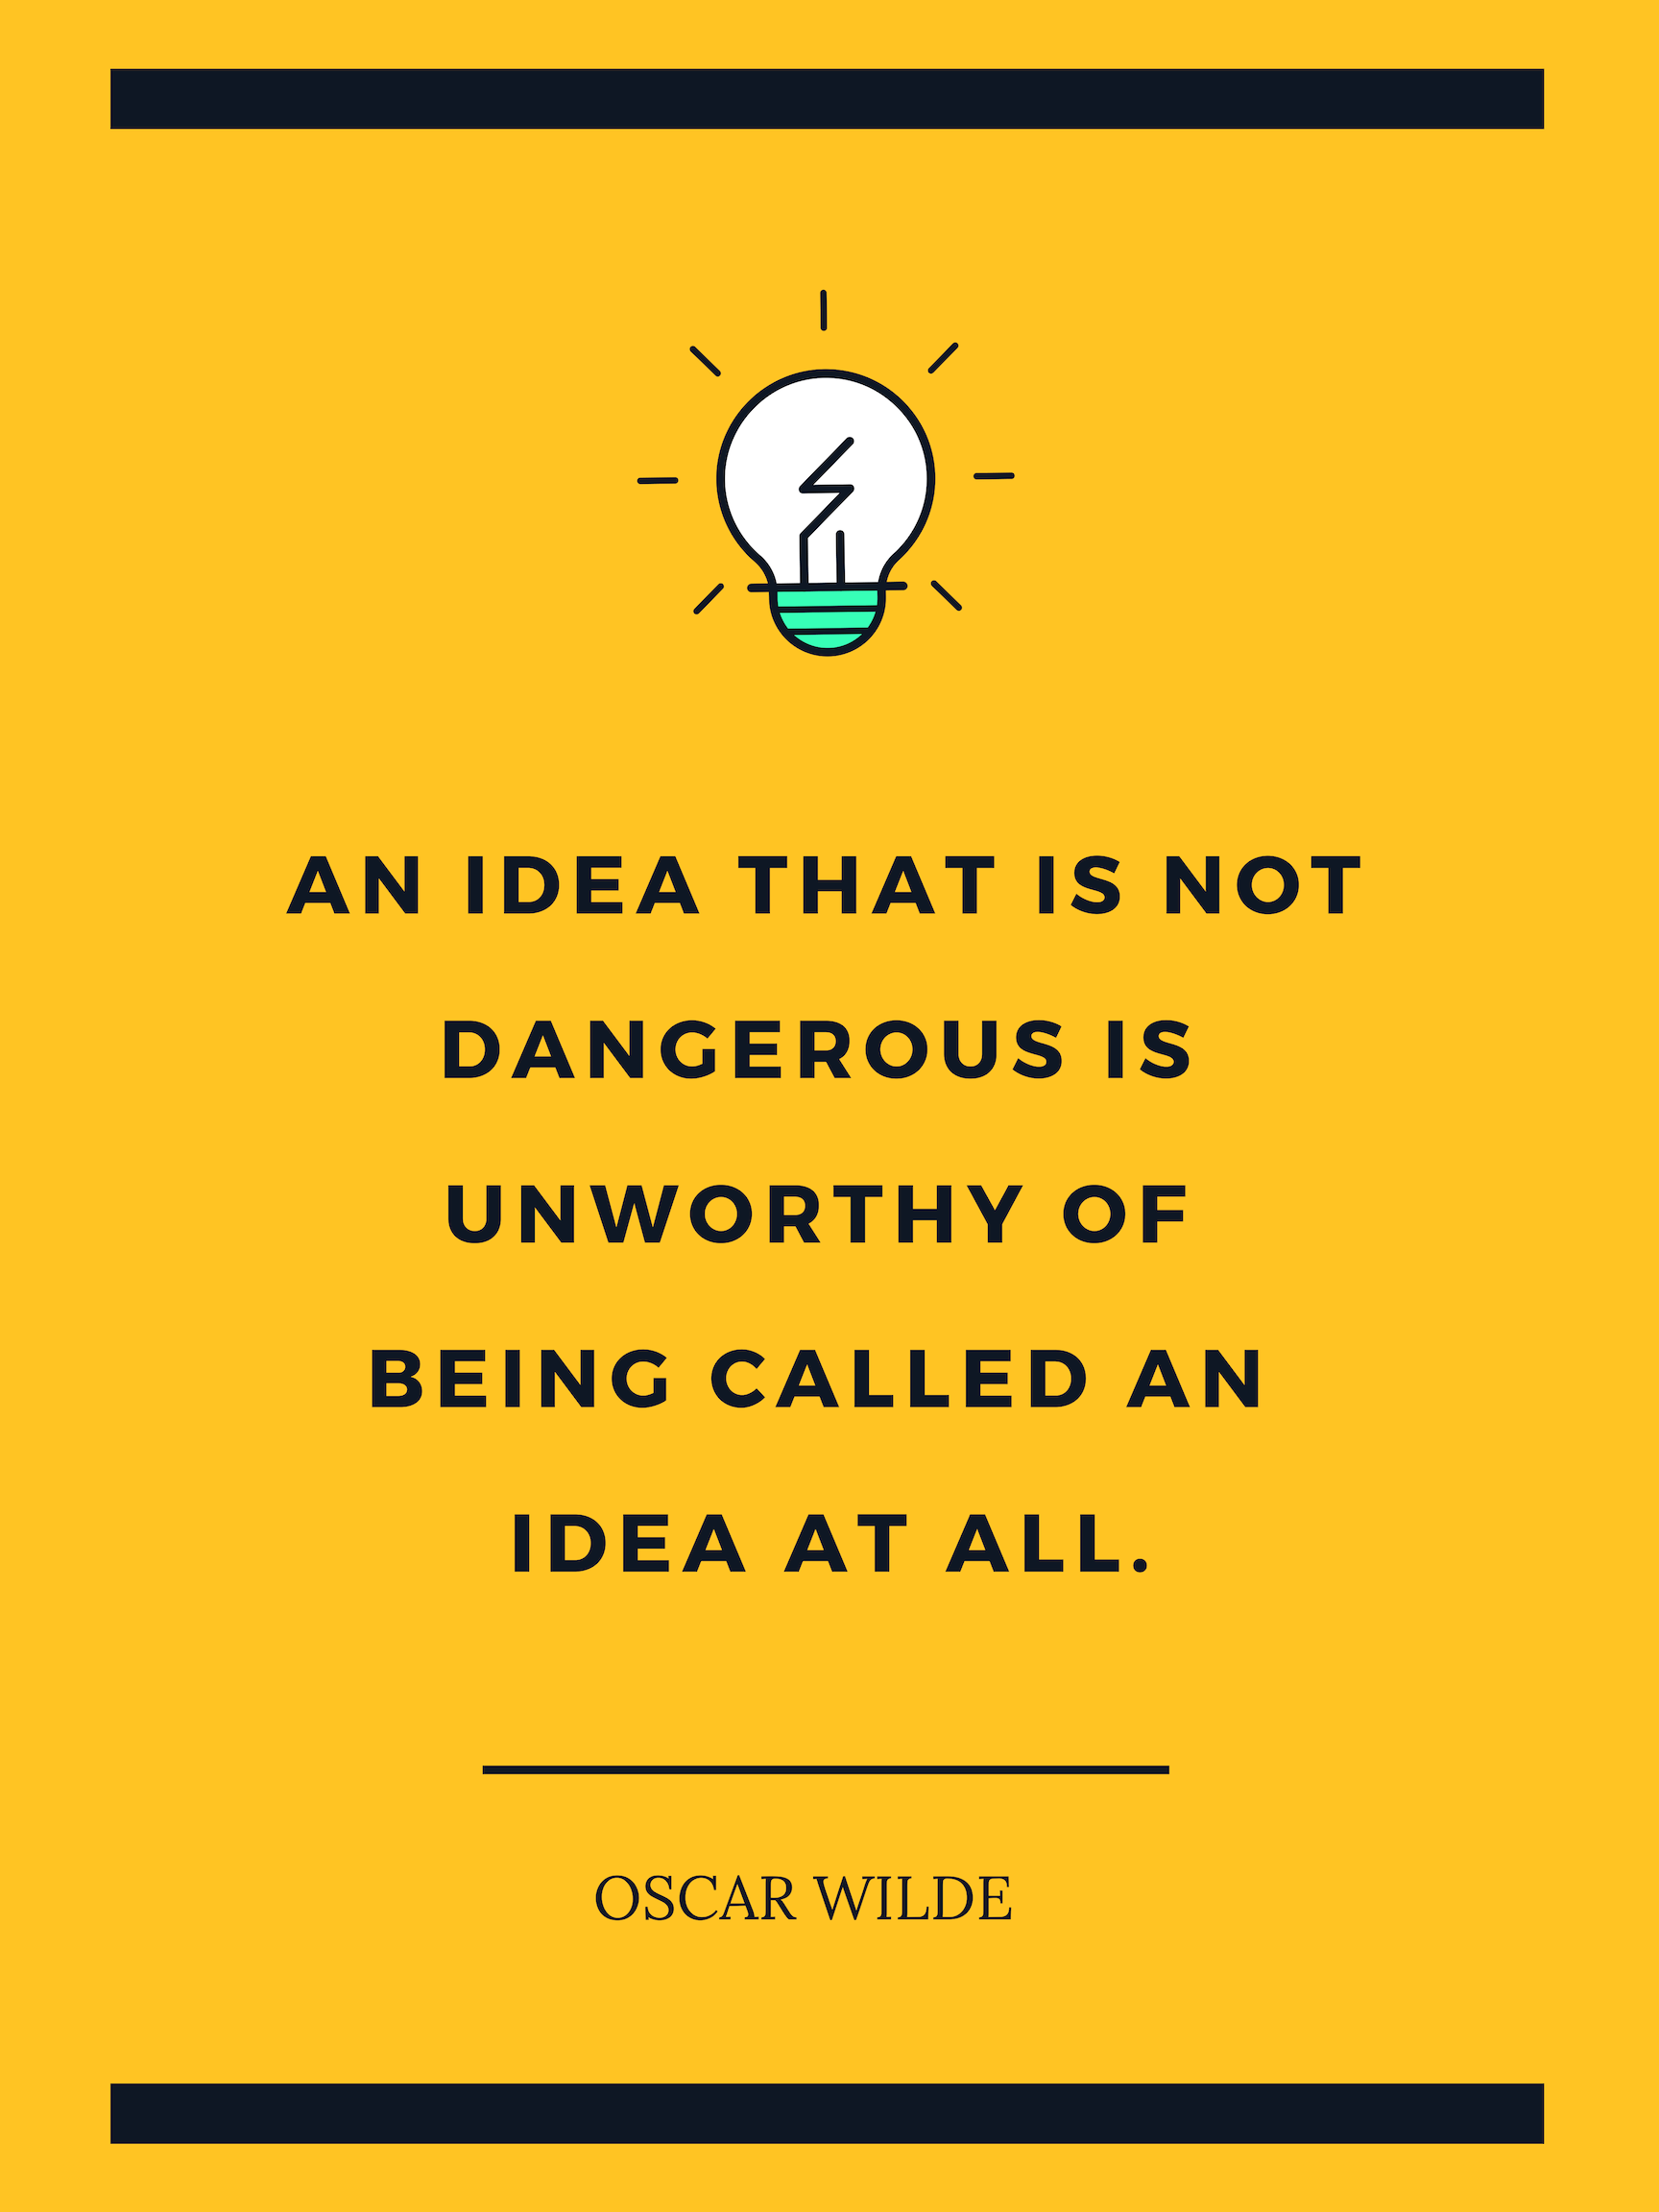 Quote by Oscar Wilde about how new ideas naturally always feel dangerous